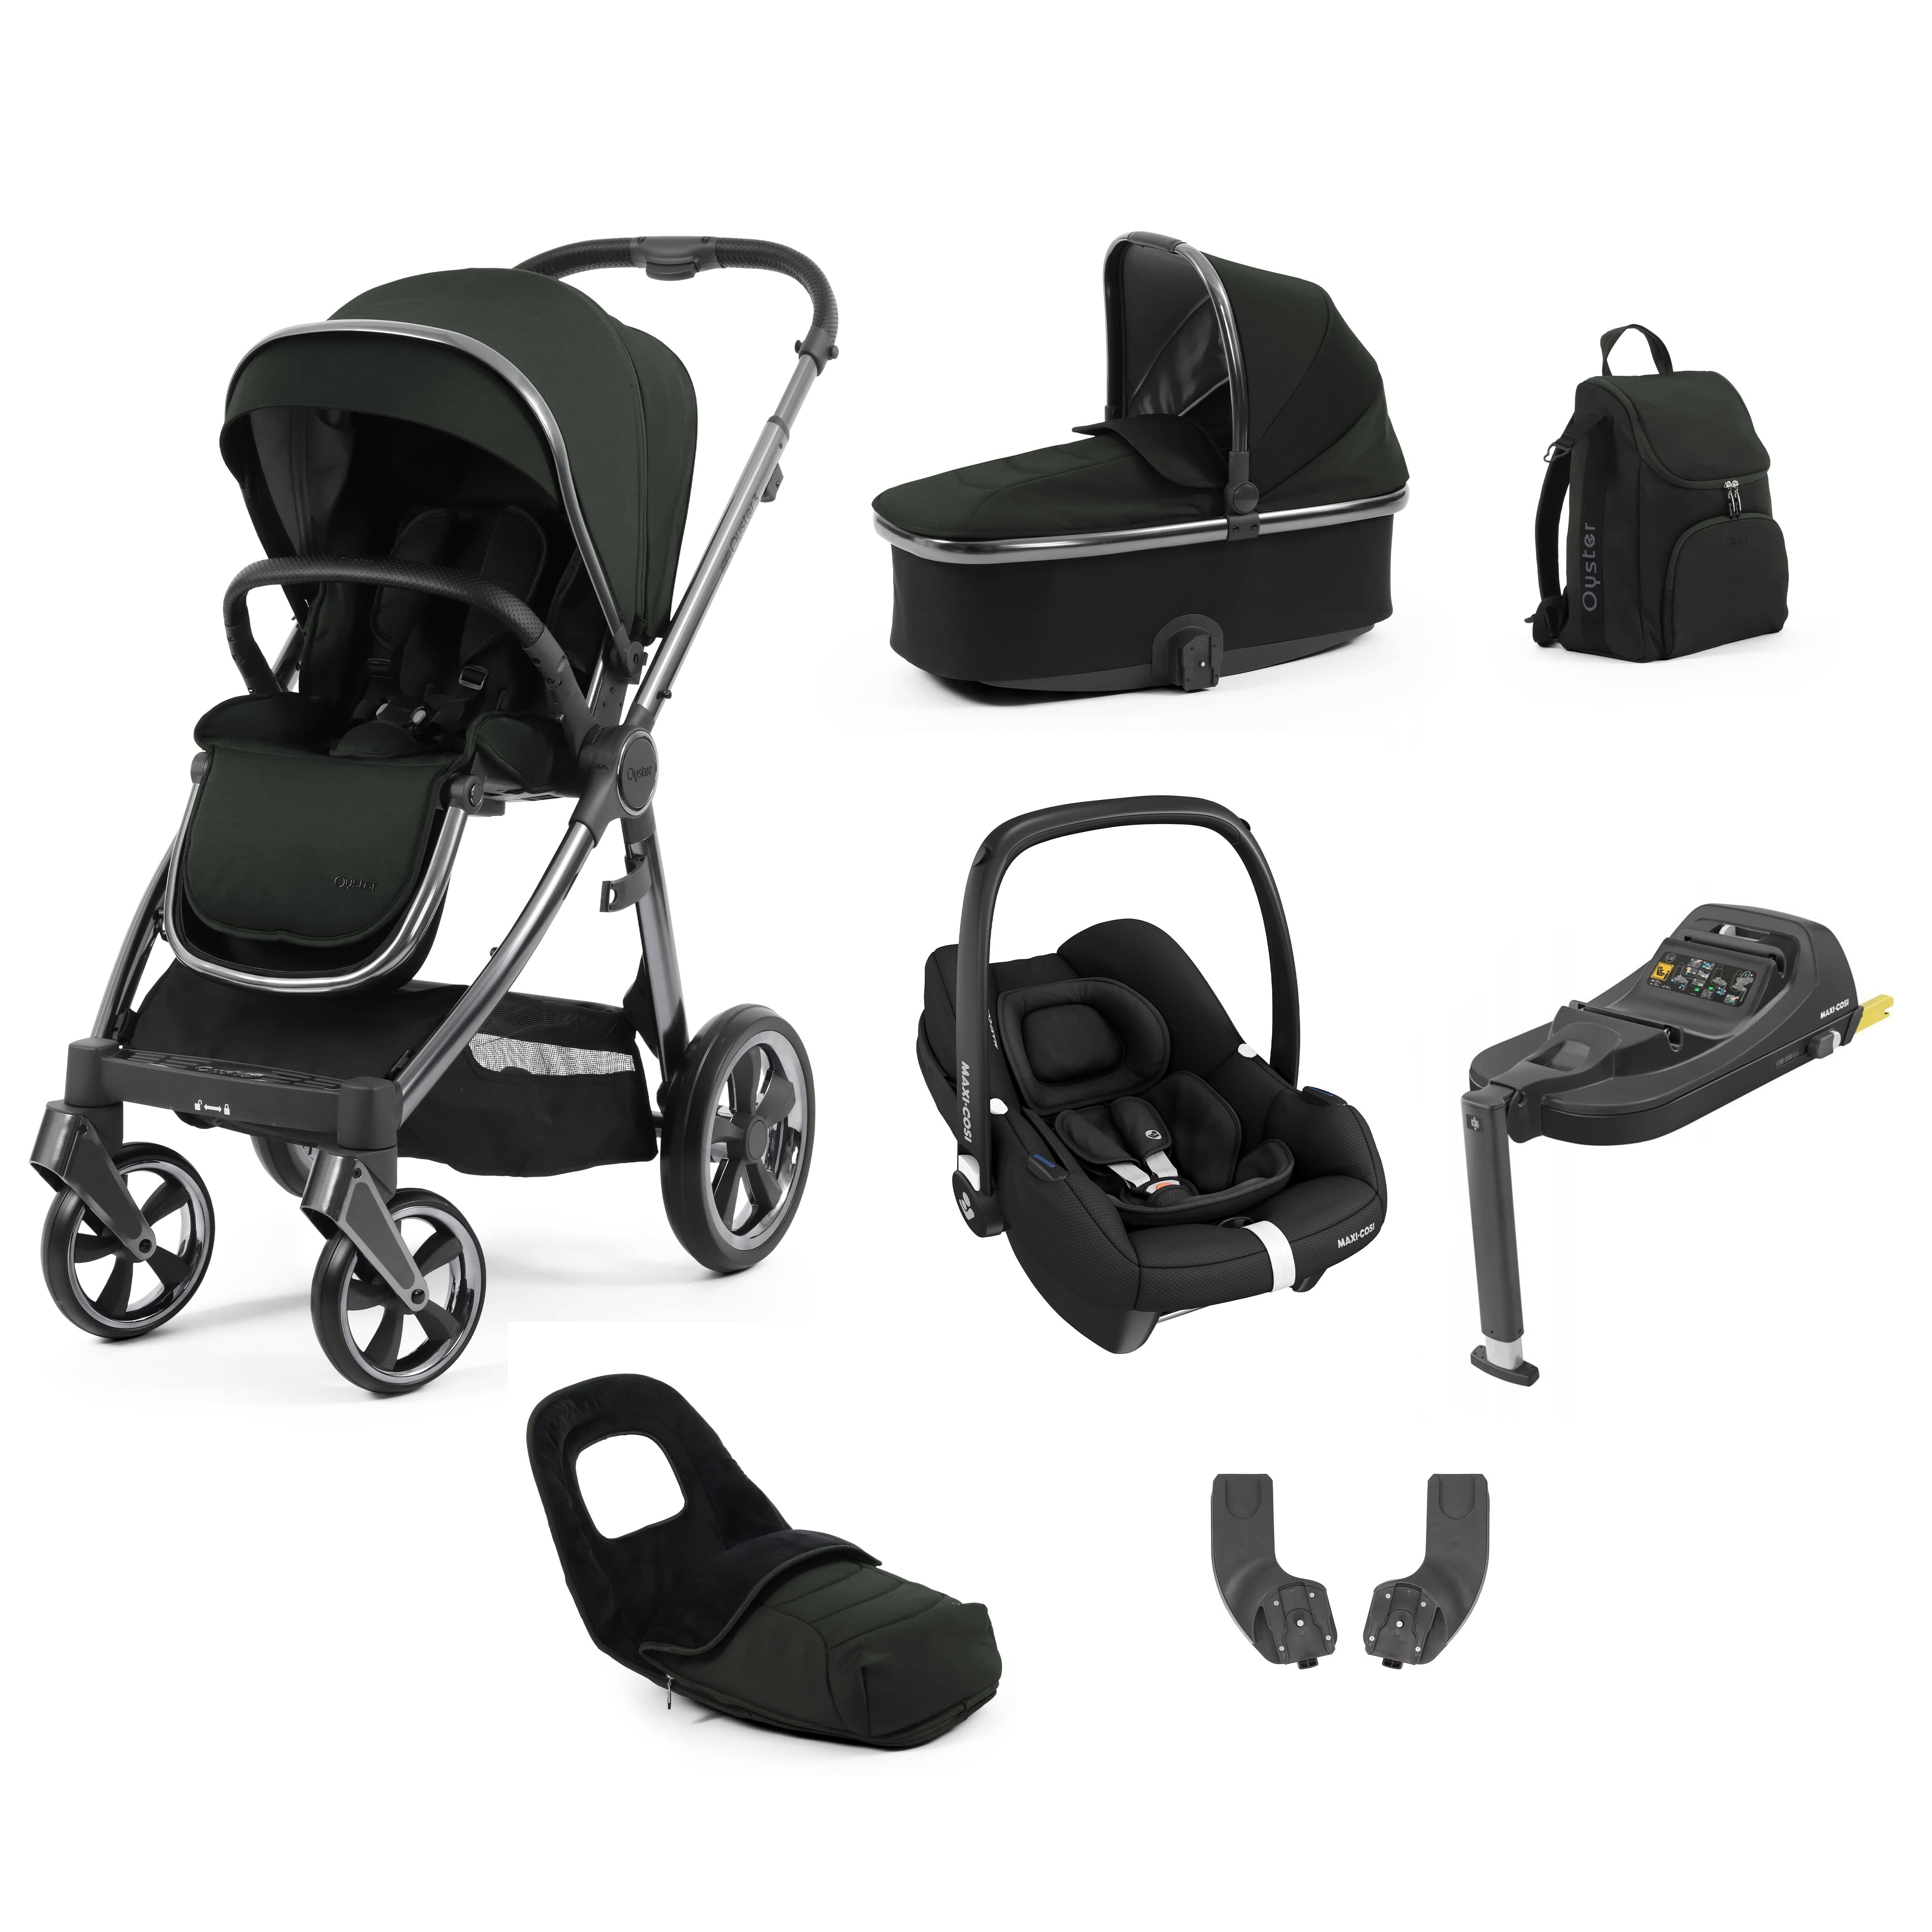 Babystyle Oyster 3 Luxury 7 Piece with Car Seat Bundle in Black Olive Travel Systems 14810-BLO 5060711567211